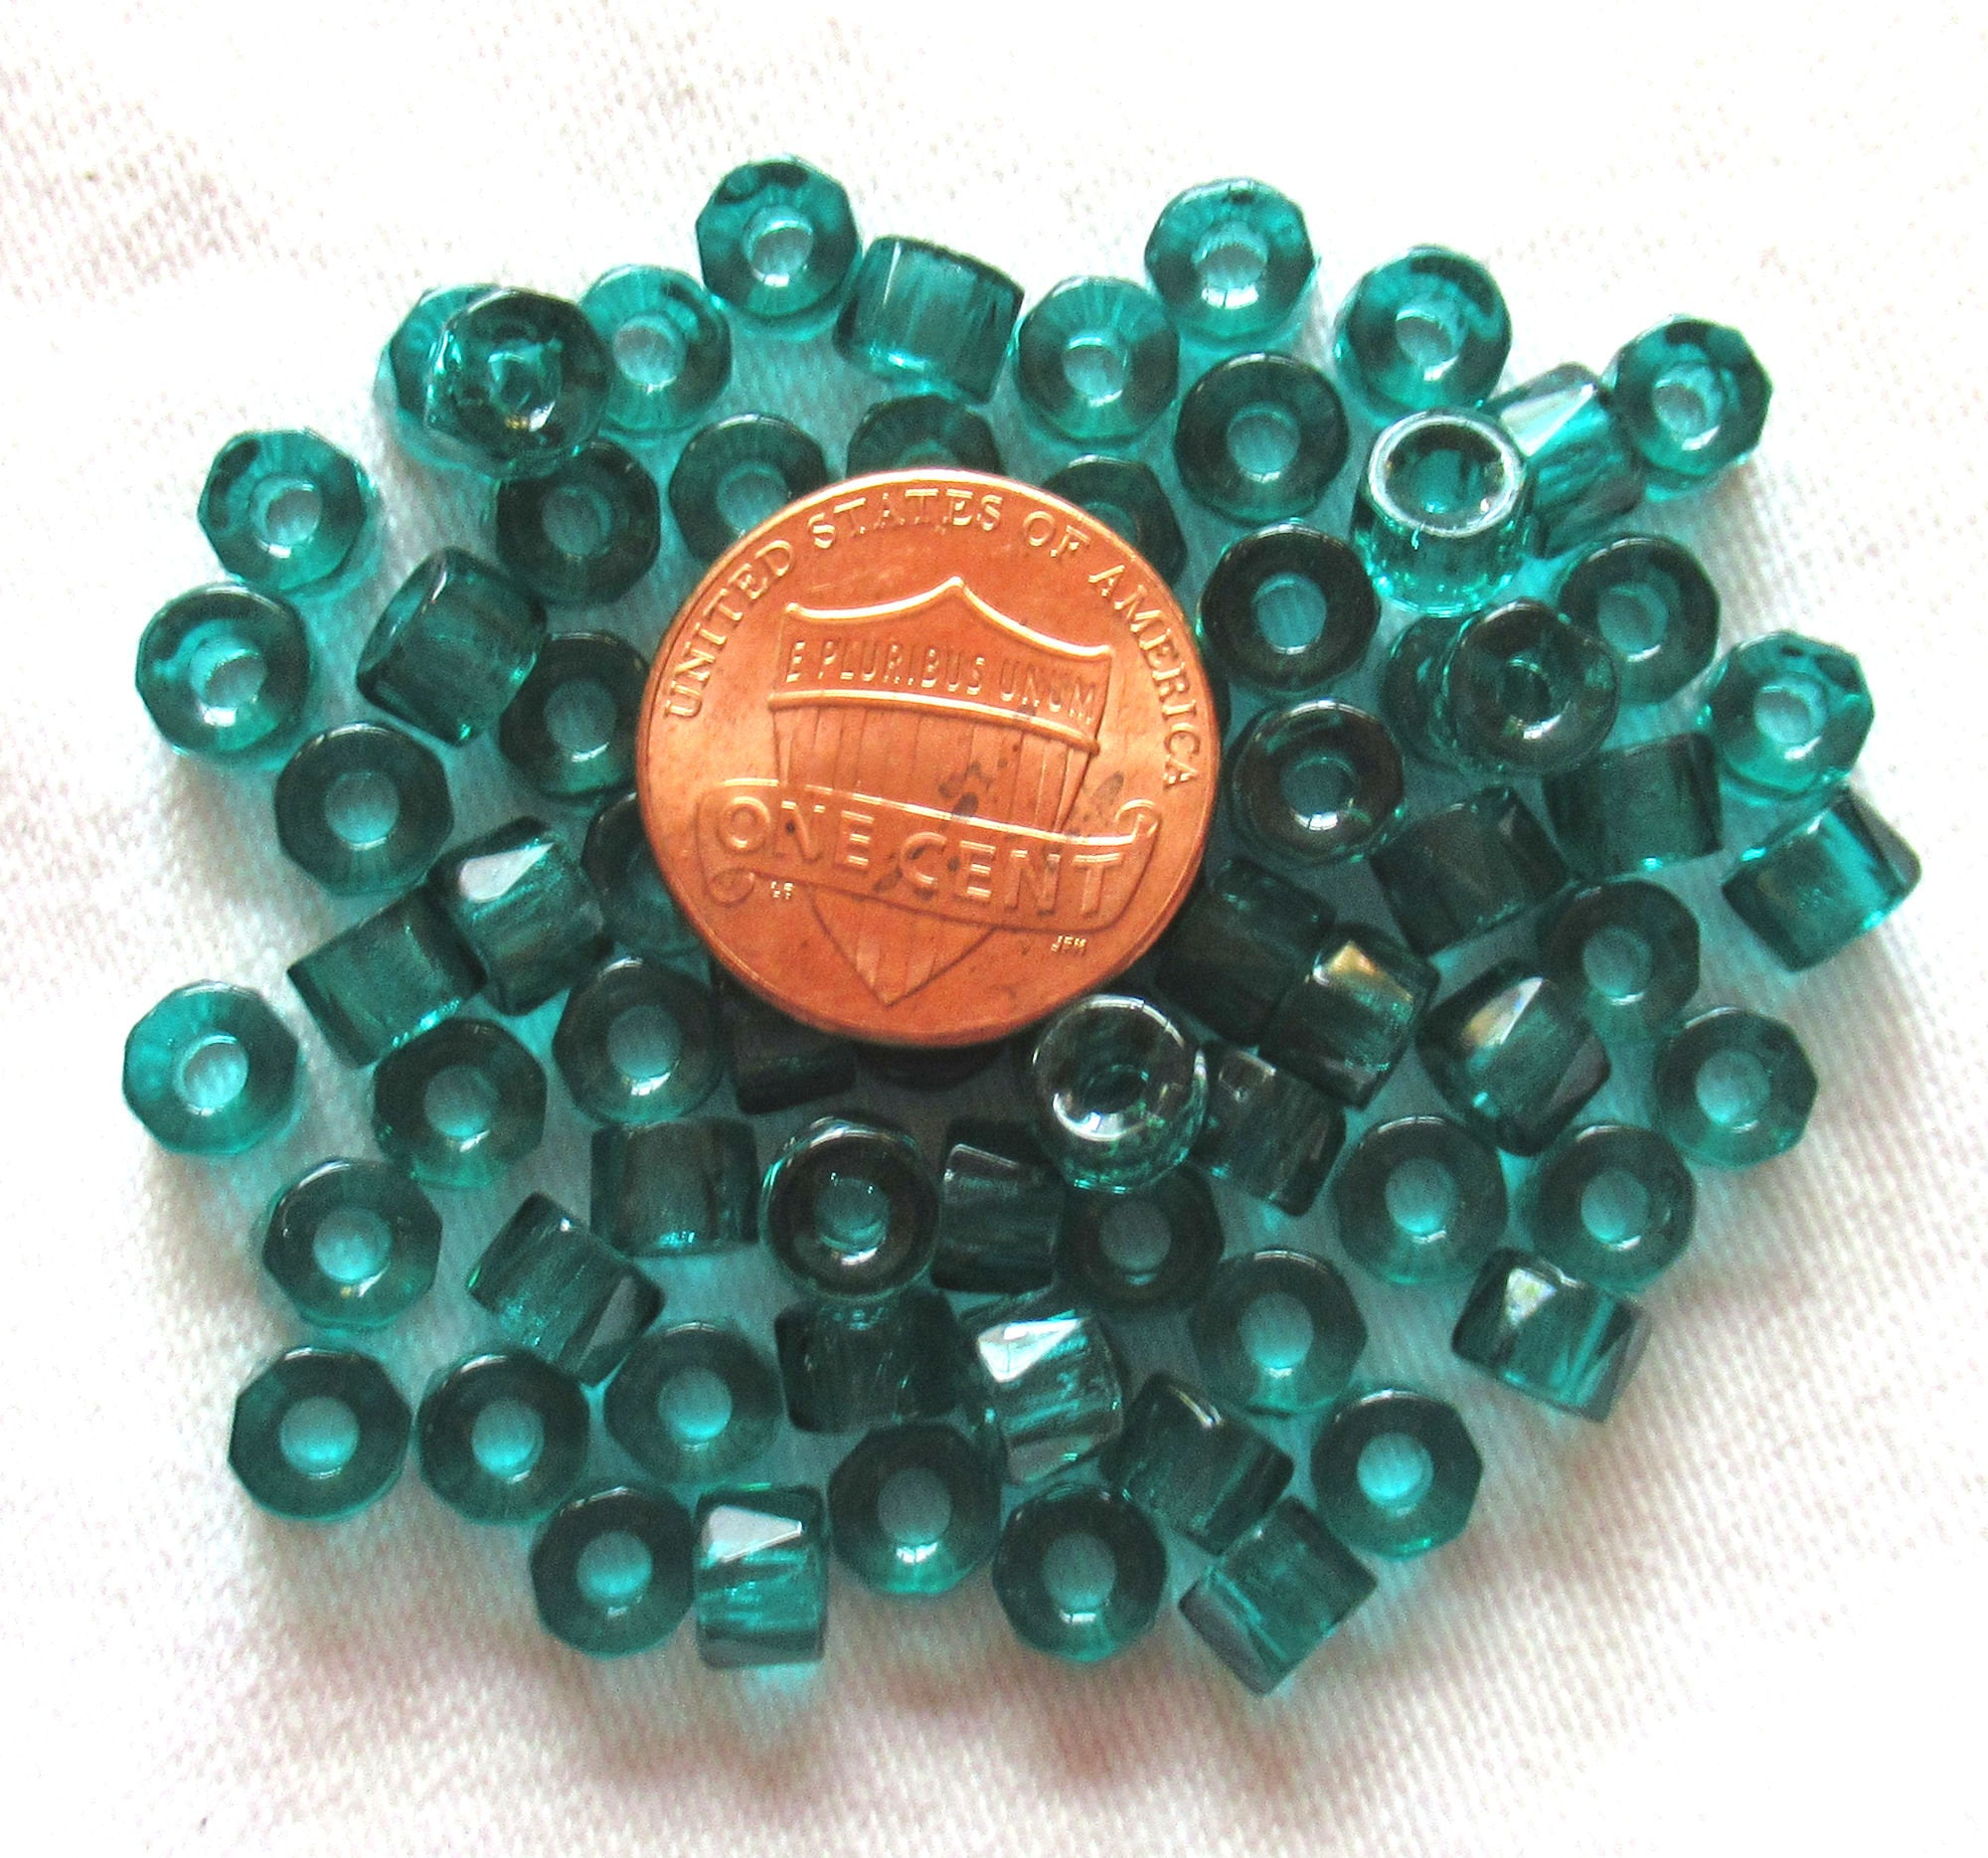 6mm Round Glass Beads - Opaque Blue Turquoise - 50 Beads